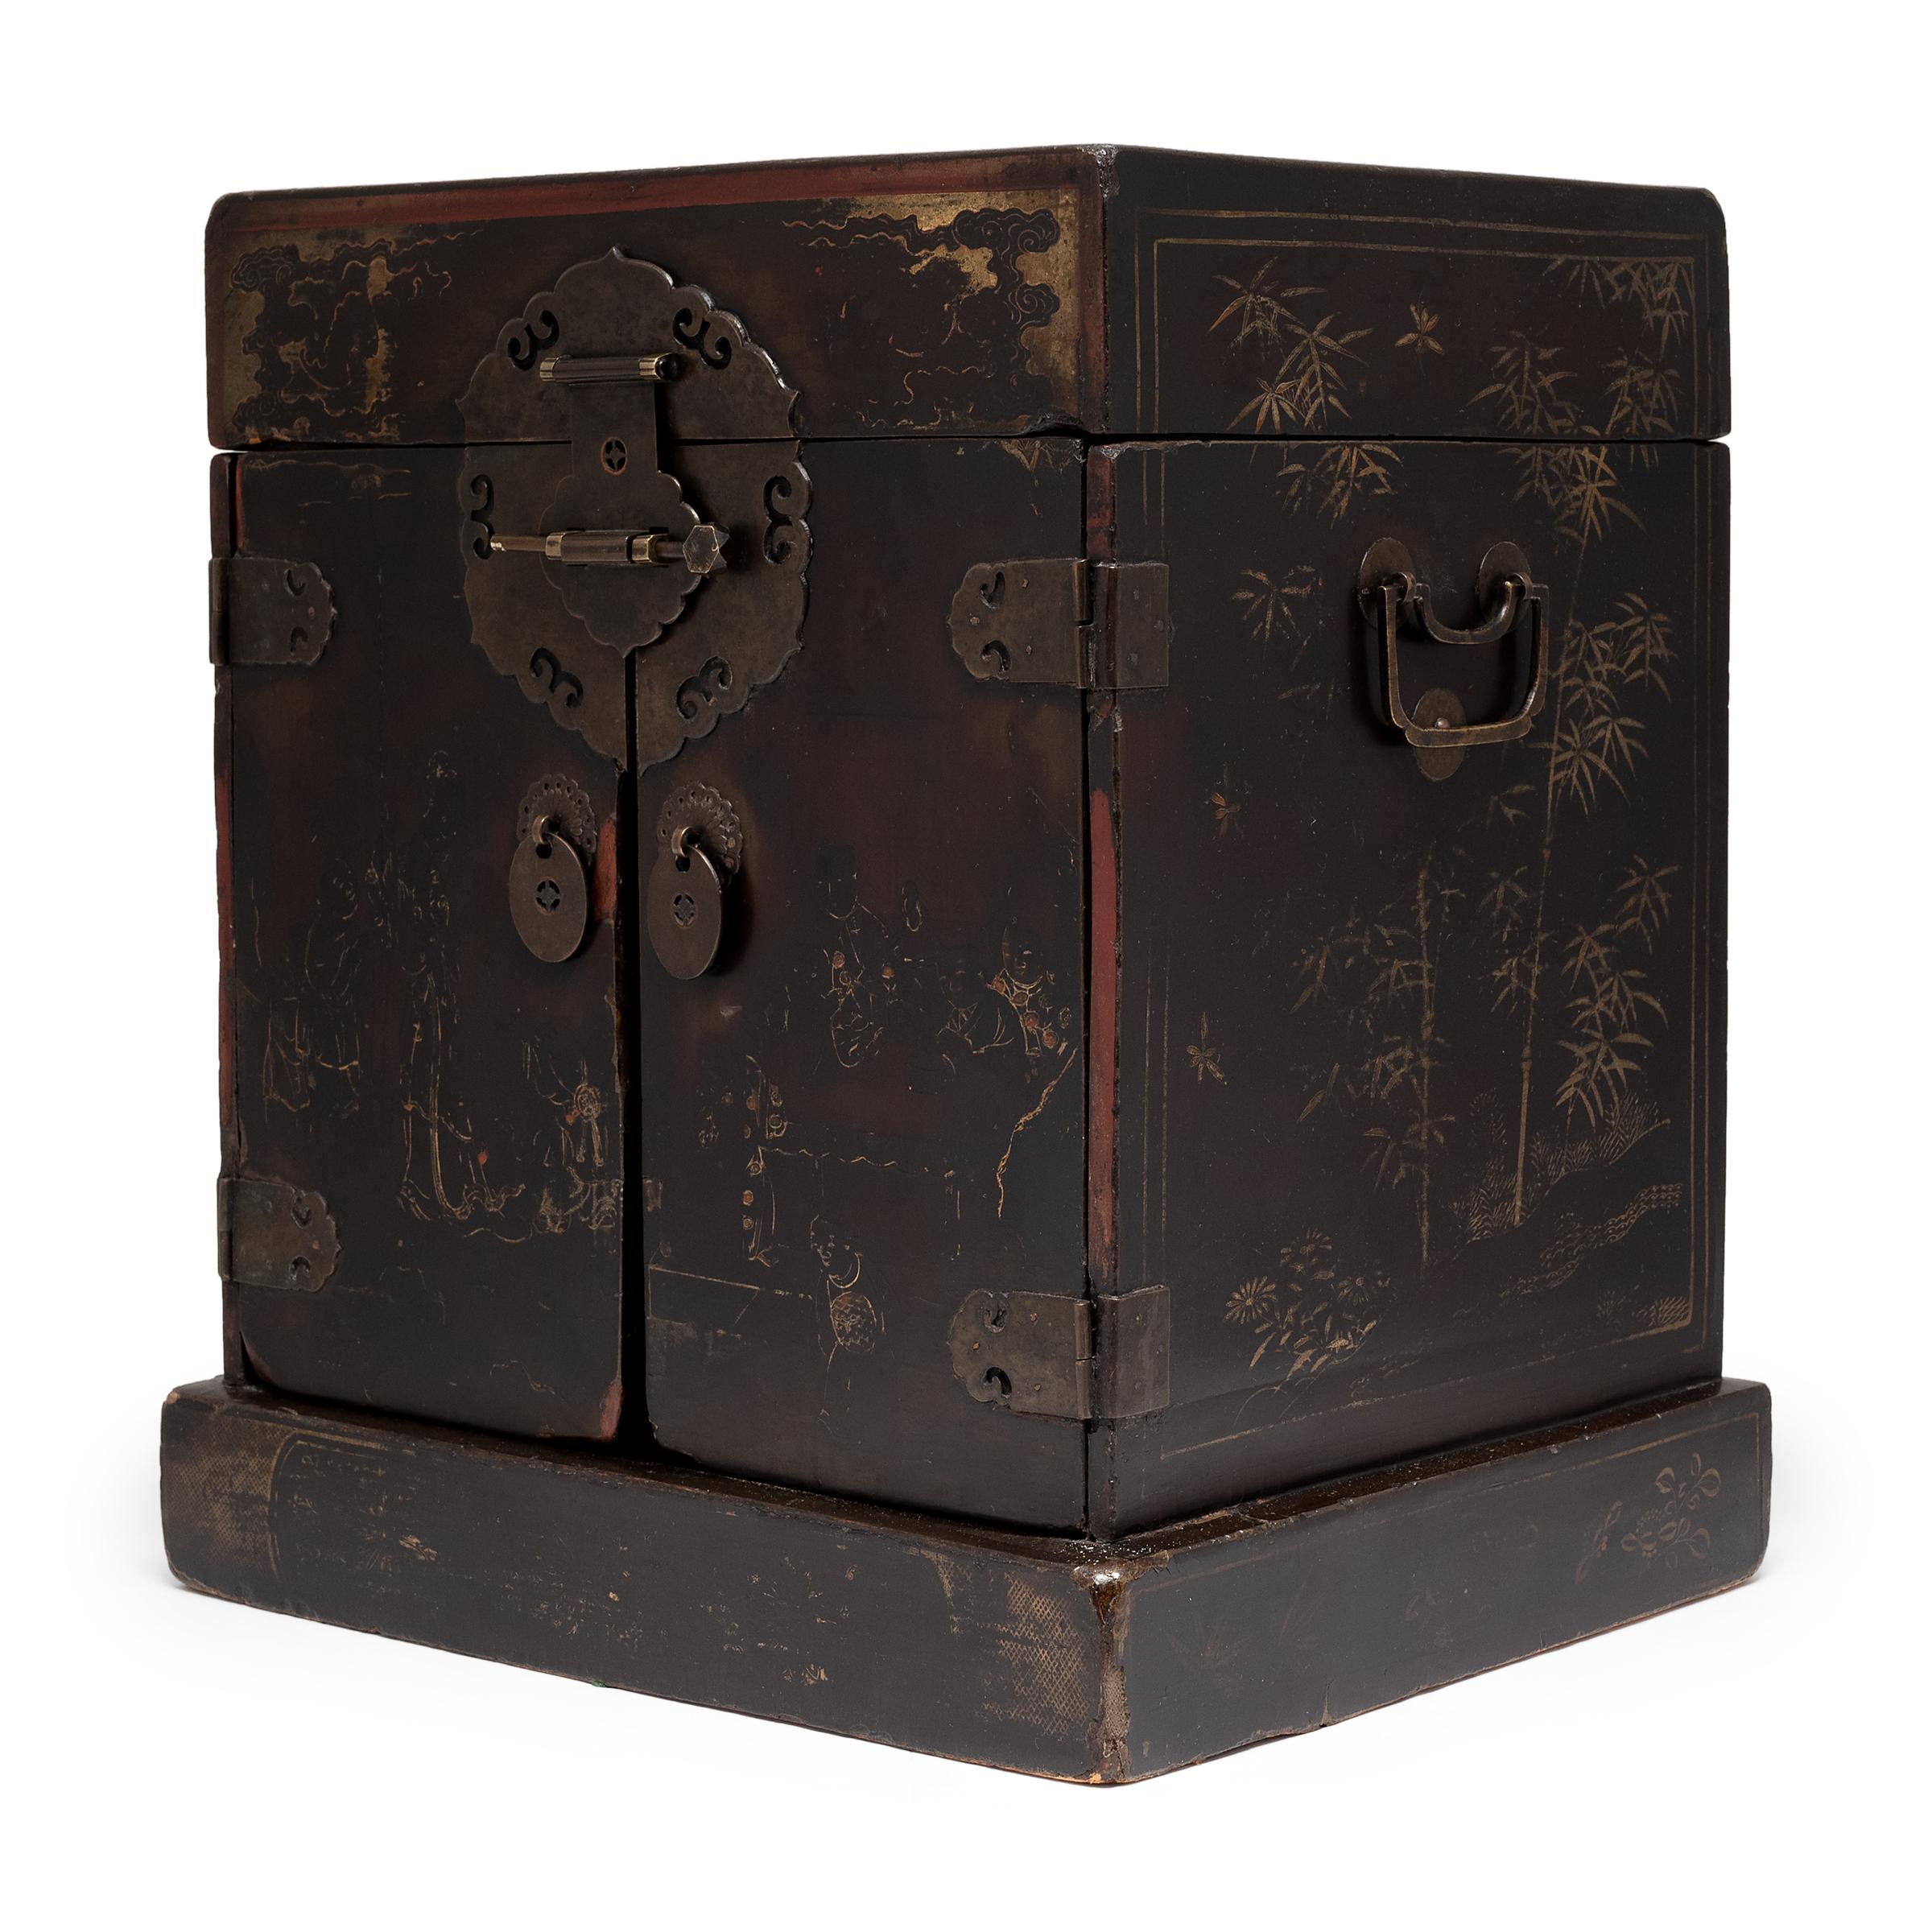 This elegant table chest was once used in the intimate quarters of a Qing-dynasty woman to store her cosmetics, jewelry, and other personal treasures. The wooden box is cloaked in layers of black lacquer, now richly aged and marked by traces of the